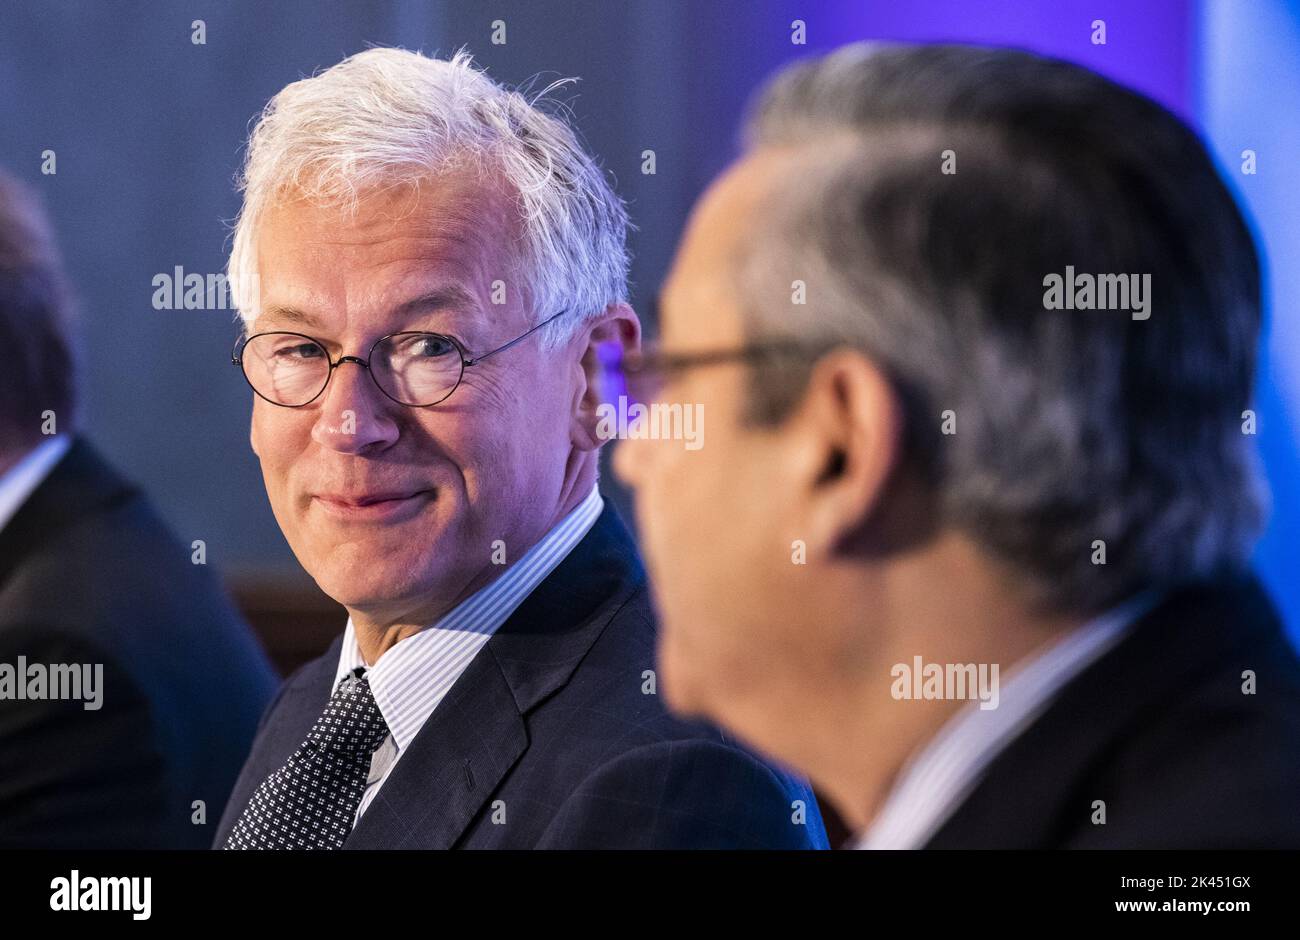 2022-09-30 09:23:40 AMSTERDAM - Former CEO Frans van Houten of Koninklijke Philips NV before the start of an extraordinary shareholders' meeting of Philips. ANP EVA PLEVIER netherlands out - belgium out Stock Photo